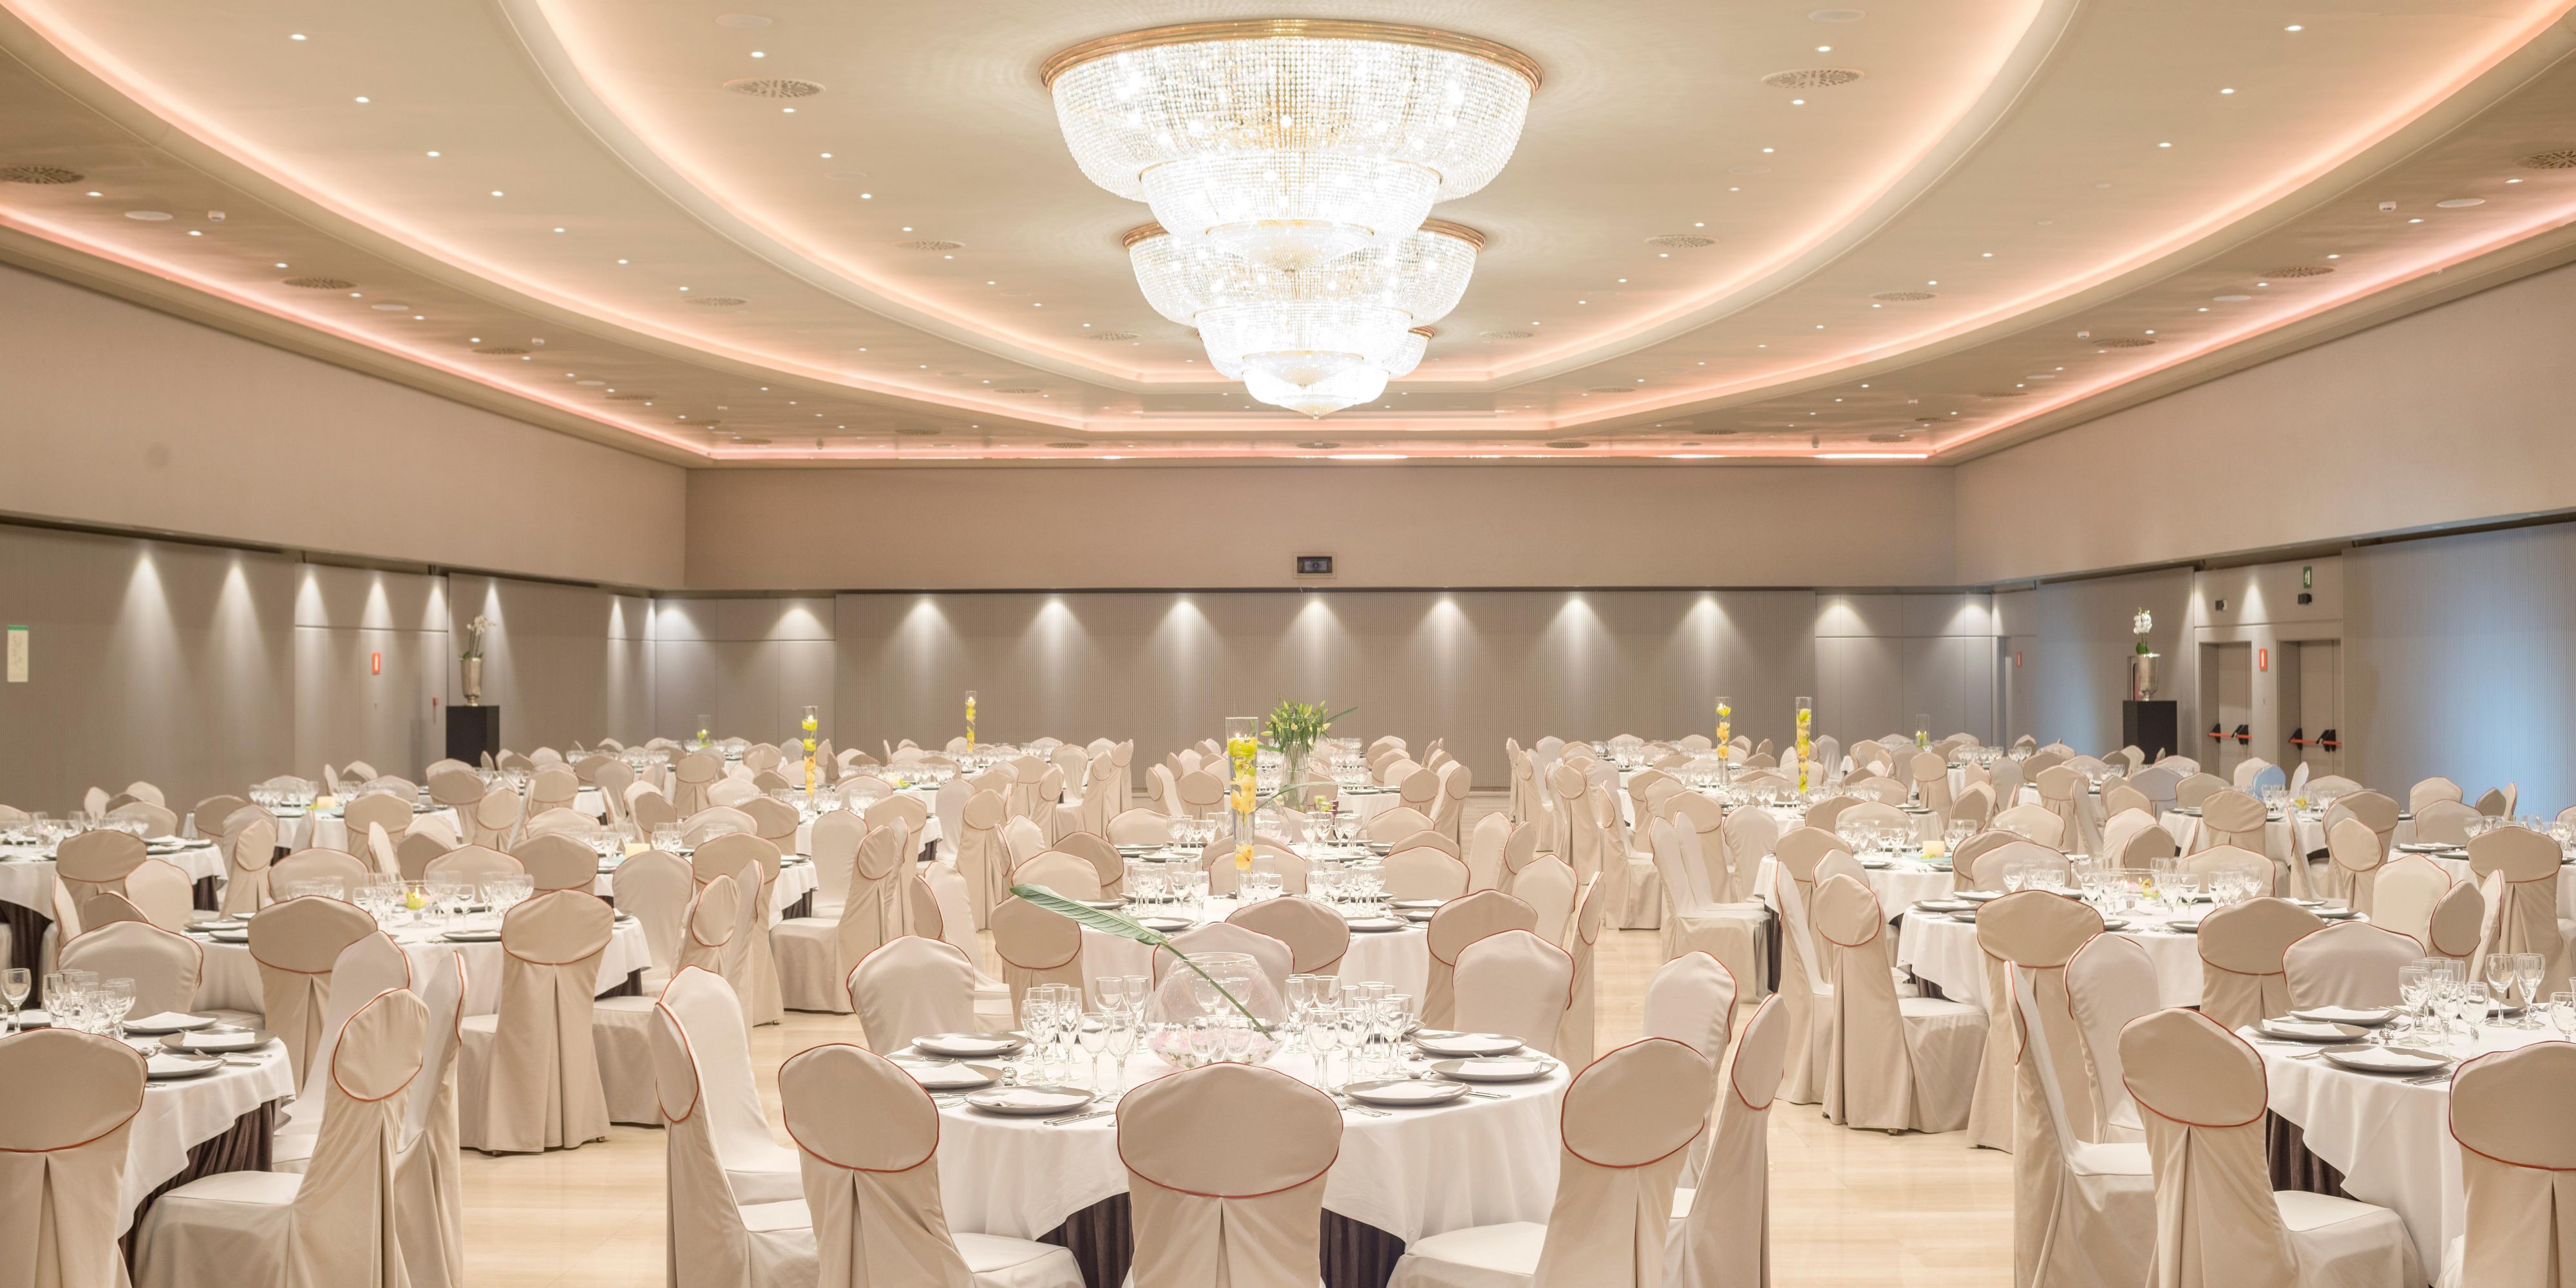 We offer the space to experience the city's vibrant lifestyle and culture. The hotel's meeting space totals 3,000 square meters, with a capacity of 1,000 delegates in theater style, 600 seated for a gala dinner and a large exhibition foyer.